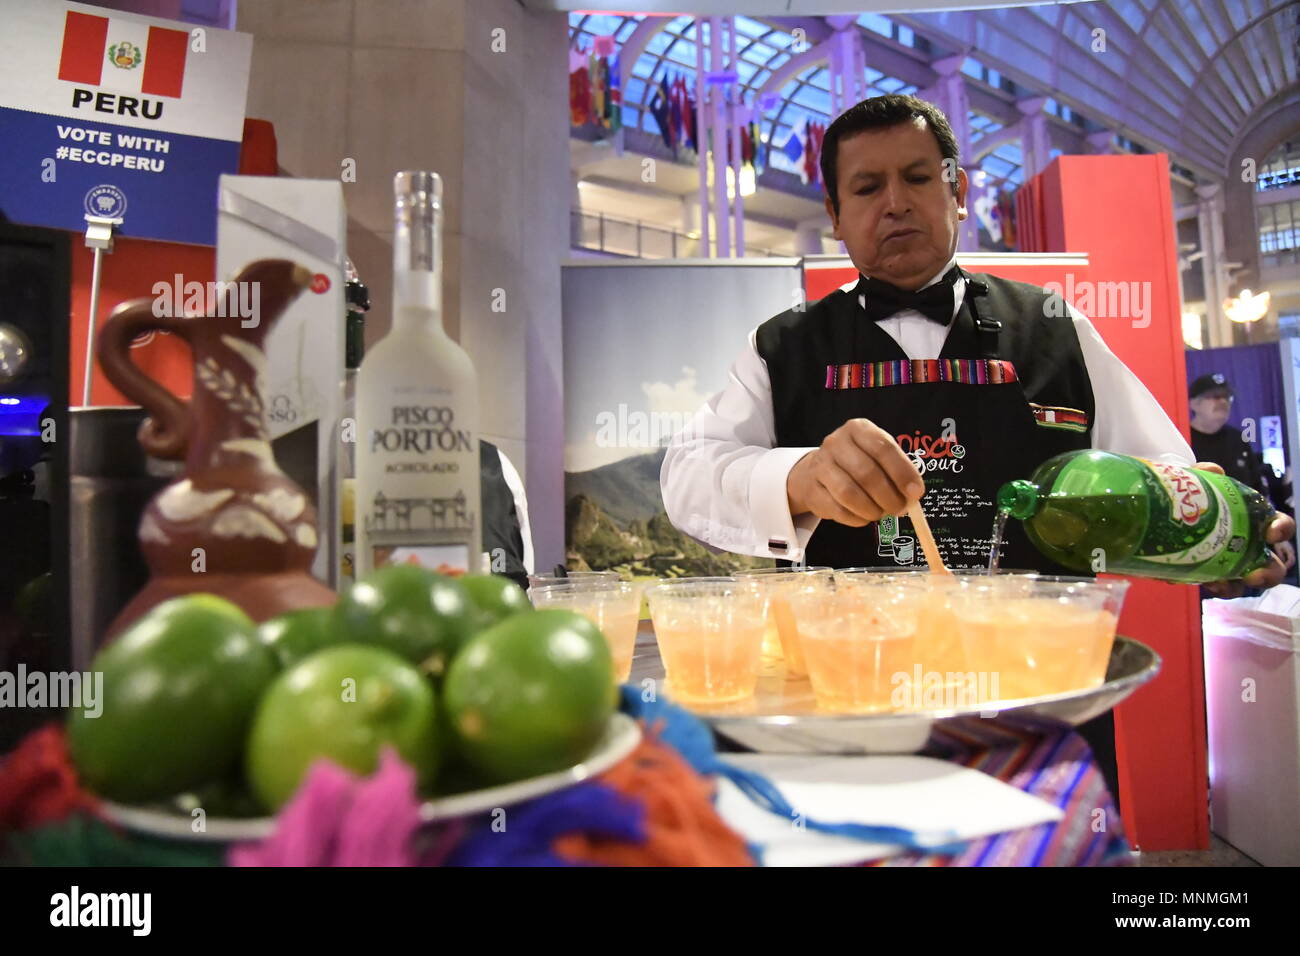 Washington, USA. 17th May, 2018. A chef from the Peru Embassy makes cocktail for guests in the 2018 Embassy Chef Challenge, in Washington, DC, the United States, May 17, 2018. Chefs from over 25 different embassies across the U.S. capital gathered at the Ronald Reagan Building and International Trade Center in downtown Washington, DC Thursday evening for the 10th annual Embassy Chef Challenge. Credit: Yang Chenglin/Xinhua/Alamy Live News Stock Photo